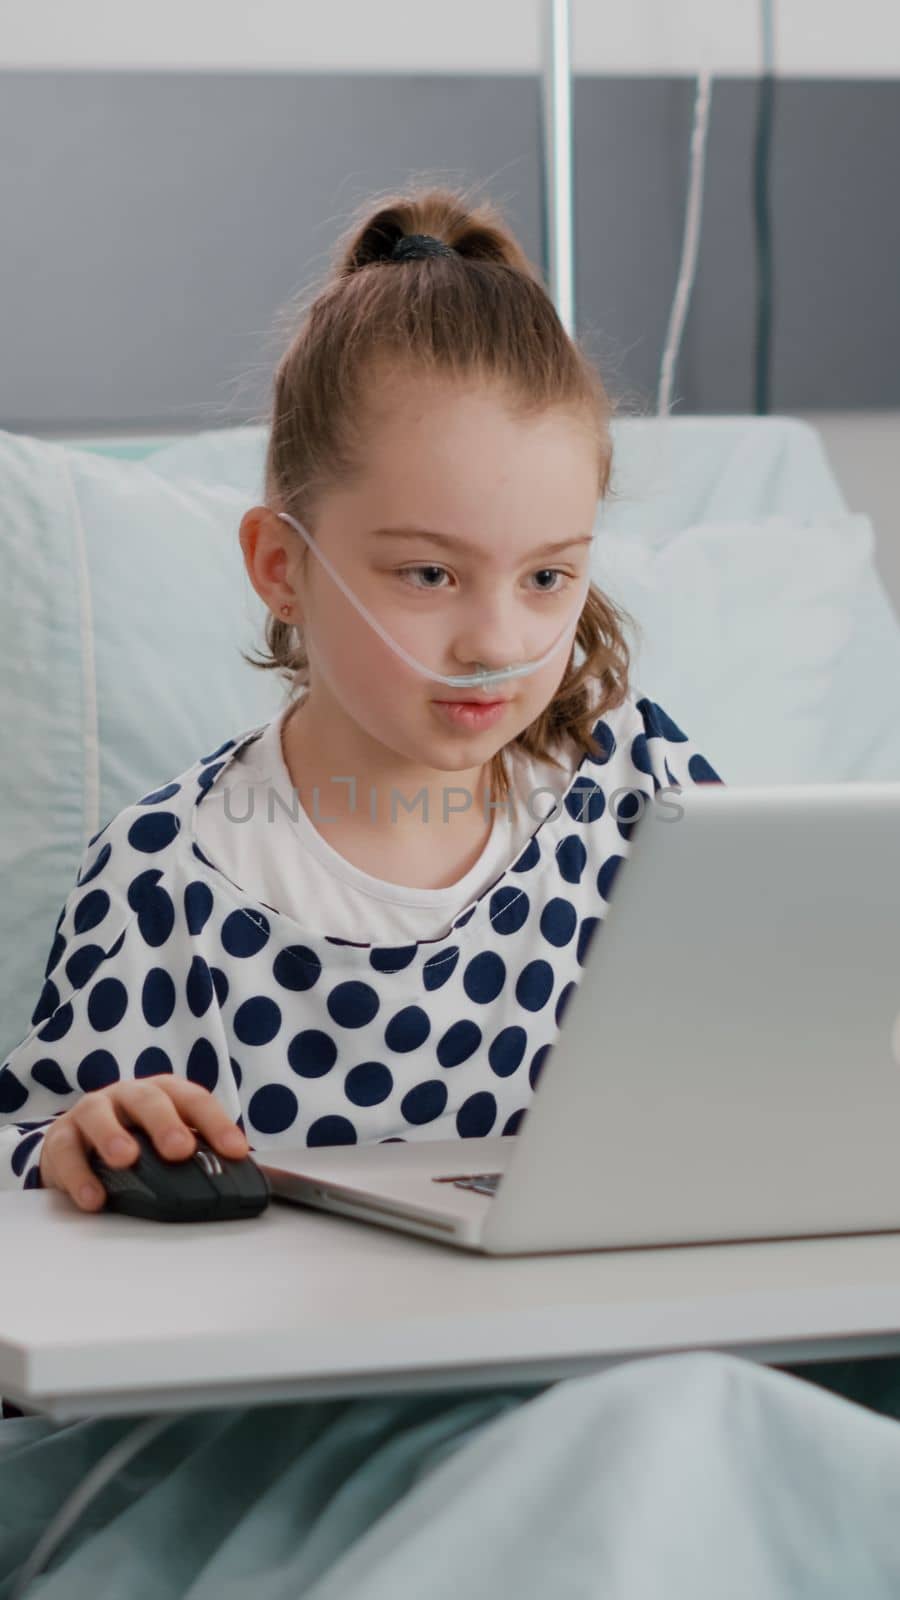 Hospitalized sick girl playing online videogames using laptop computer during recovery examination in hospital ward. Child sitting in bedwearing oxygen nasal tube having breathing sickness